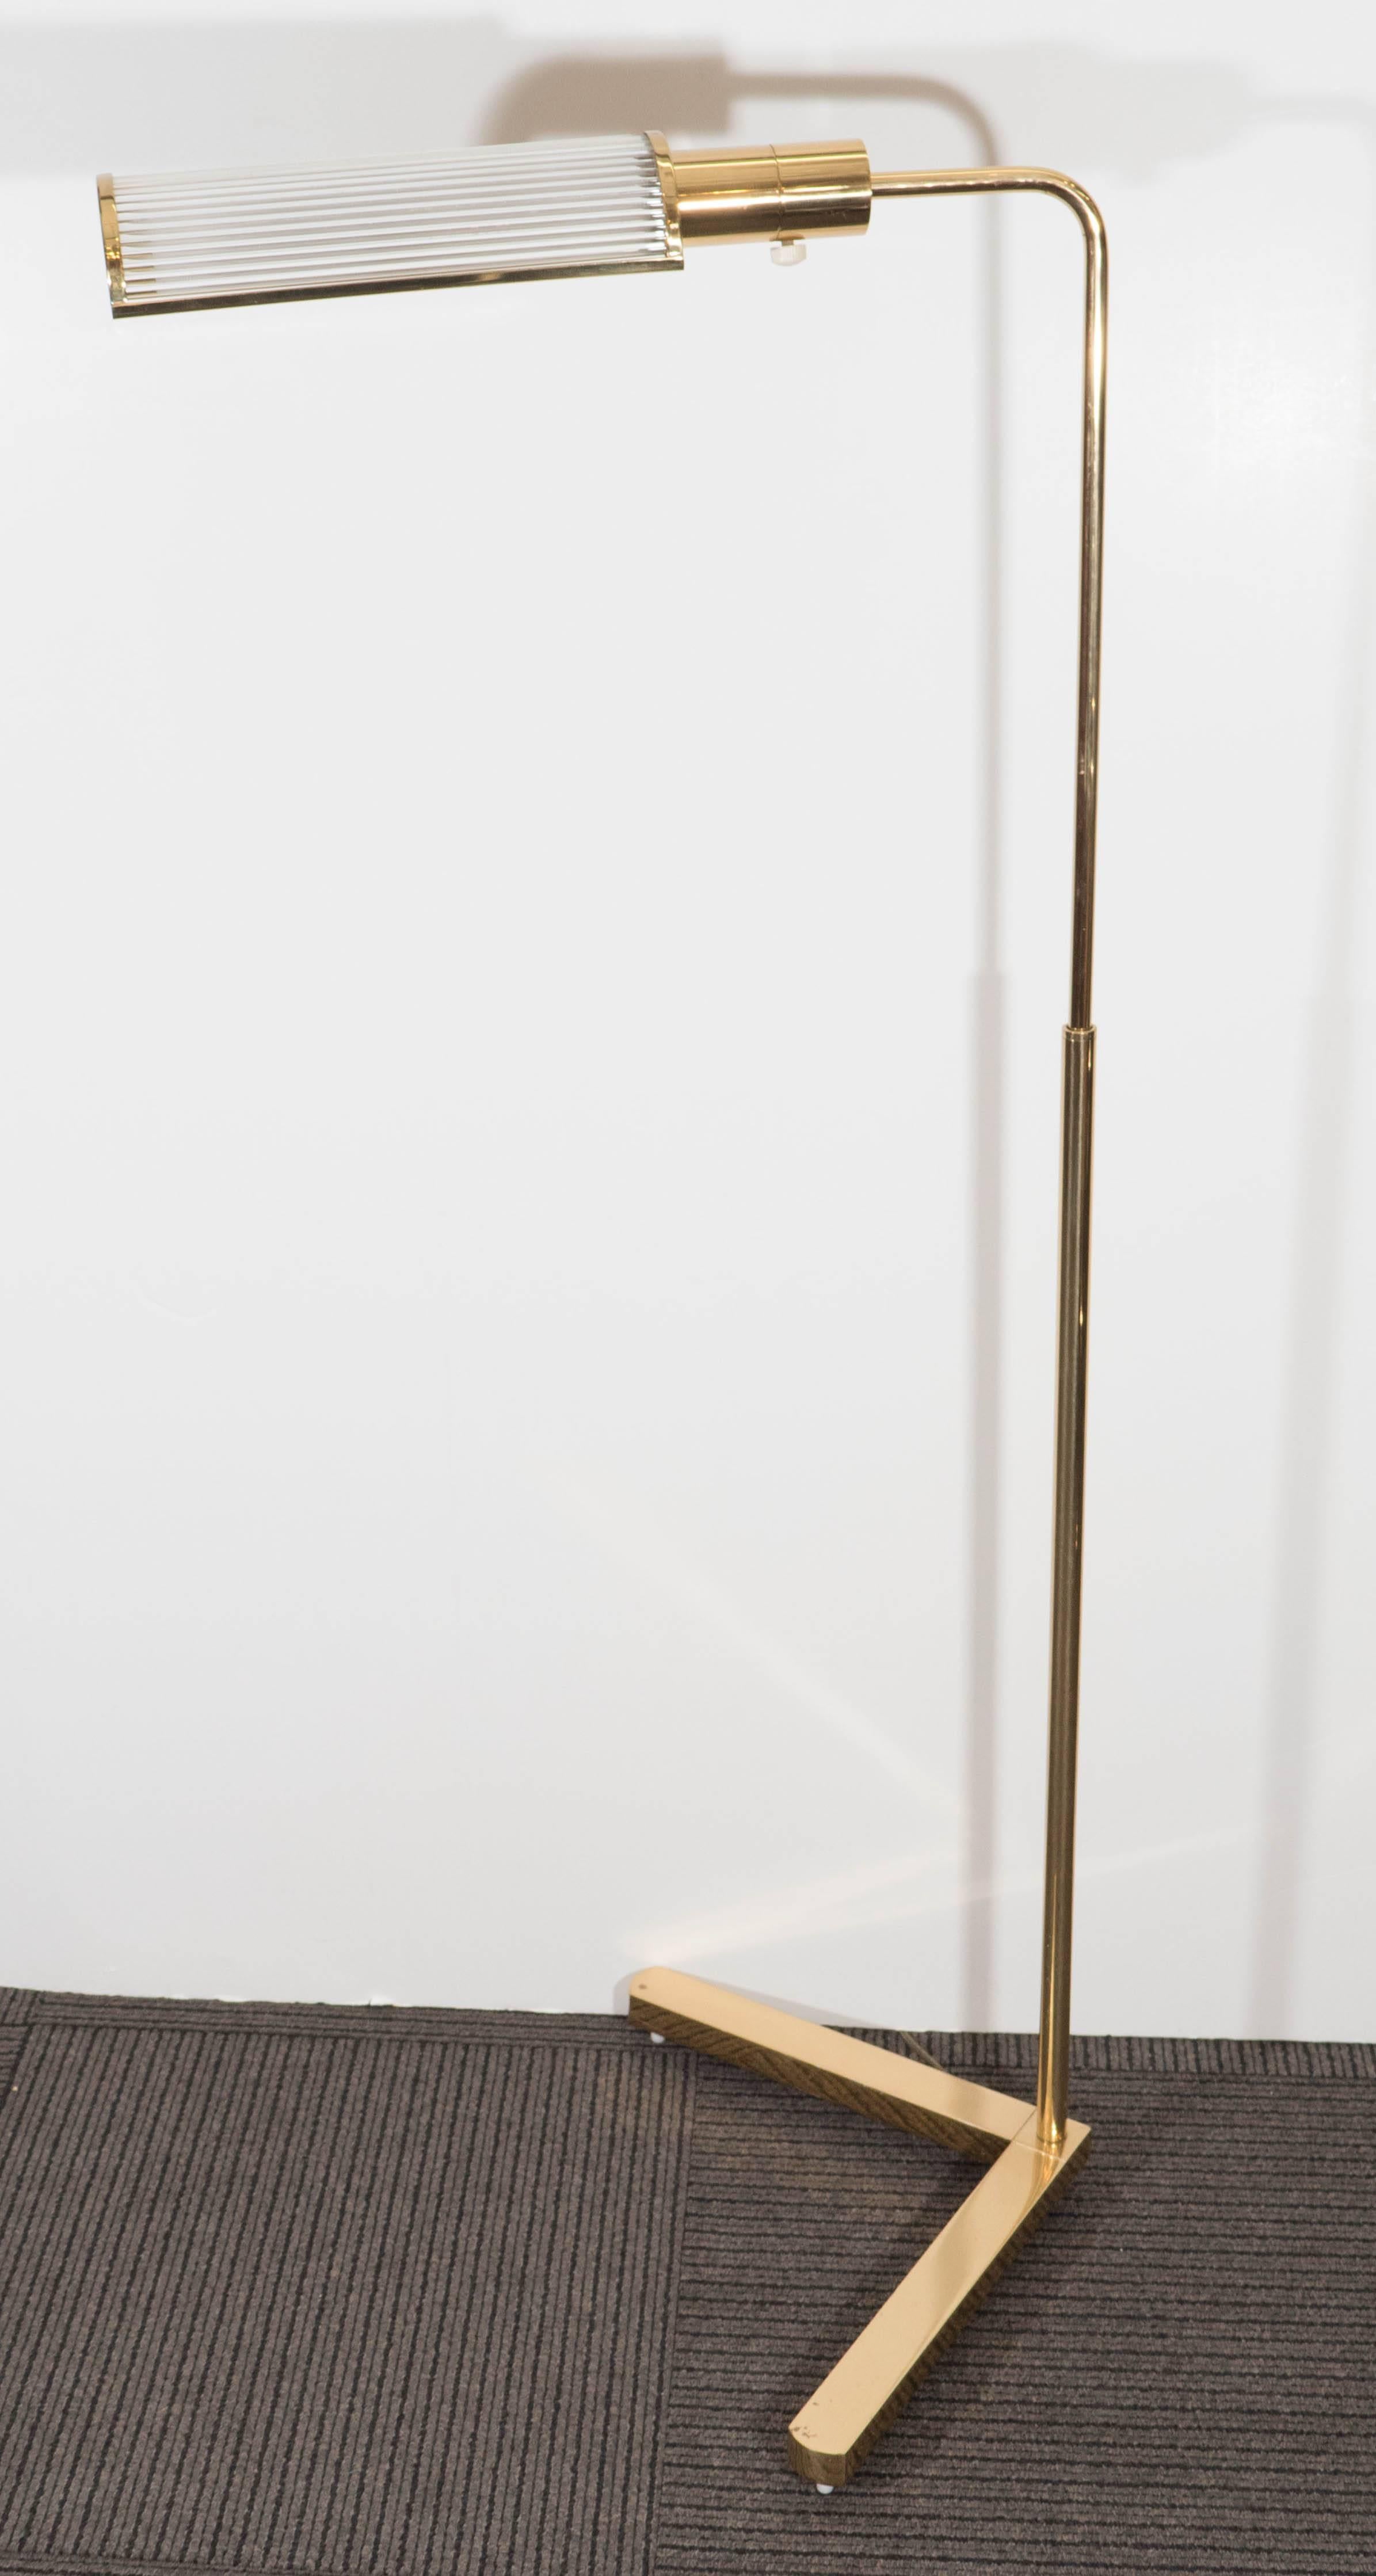 American Casella Brass Pharmacy Floor Lamp with Glass Rod Shade